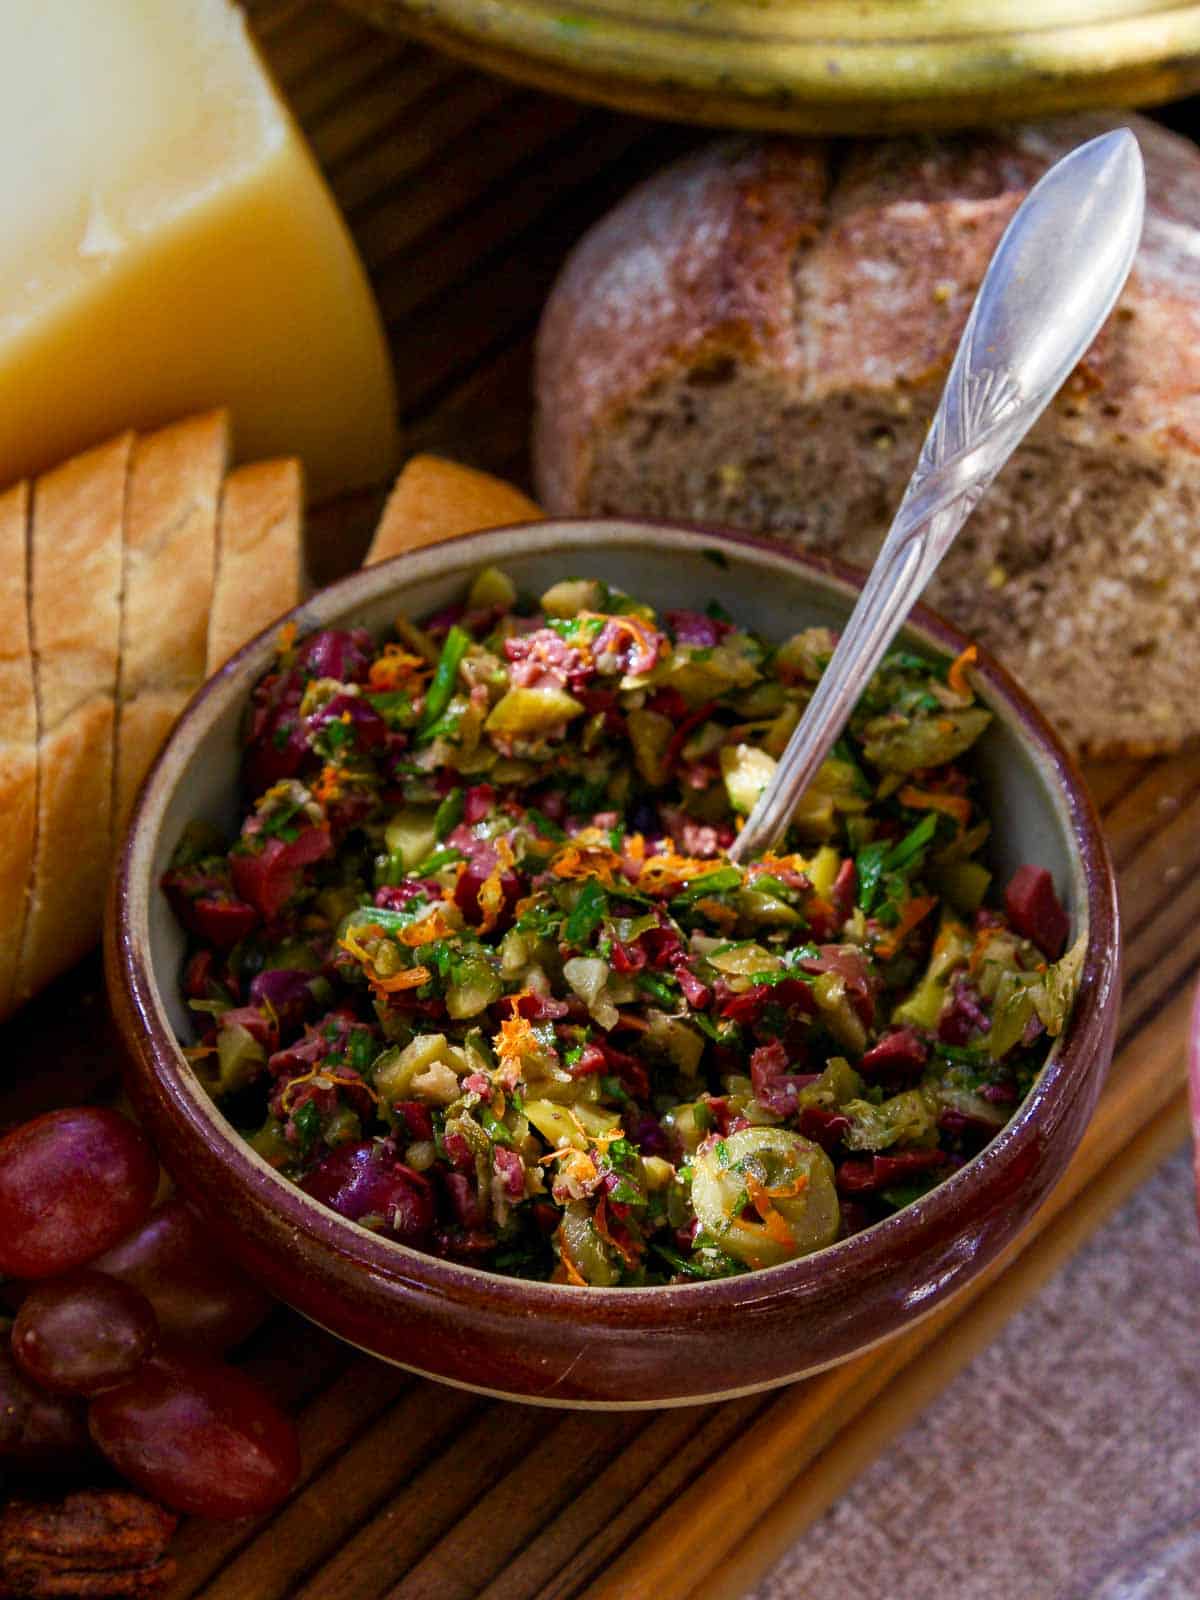 A vintage bowl with green olive tapenade and bread nearby.